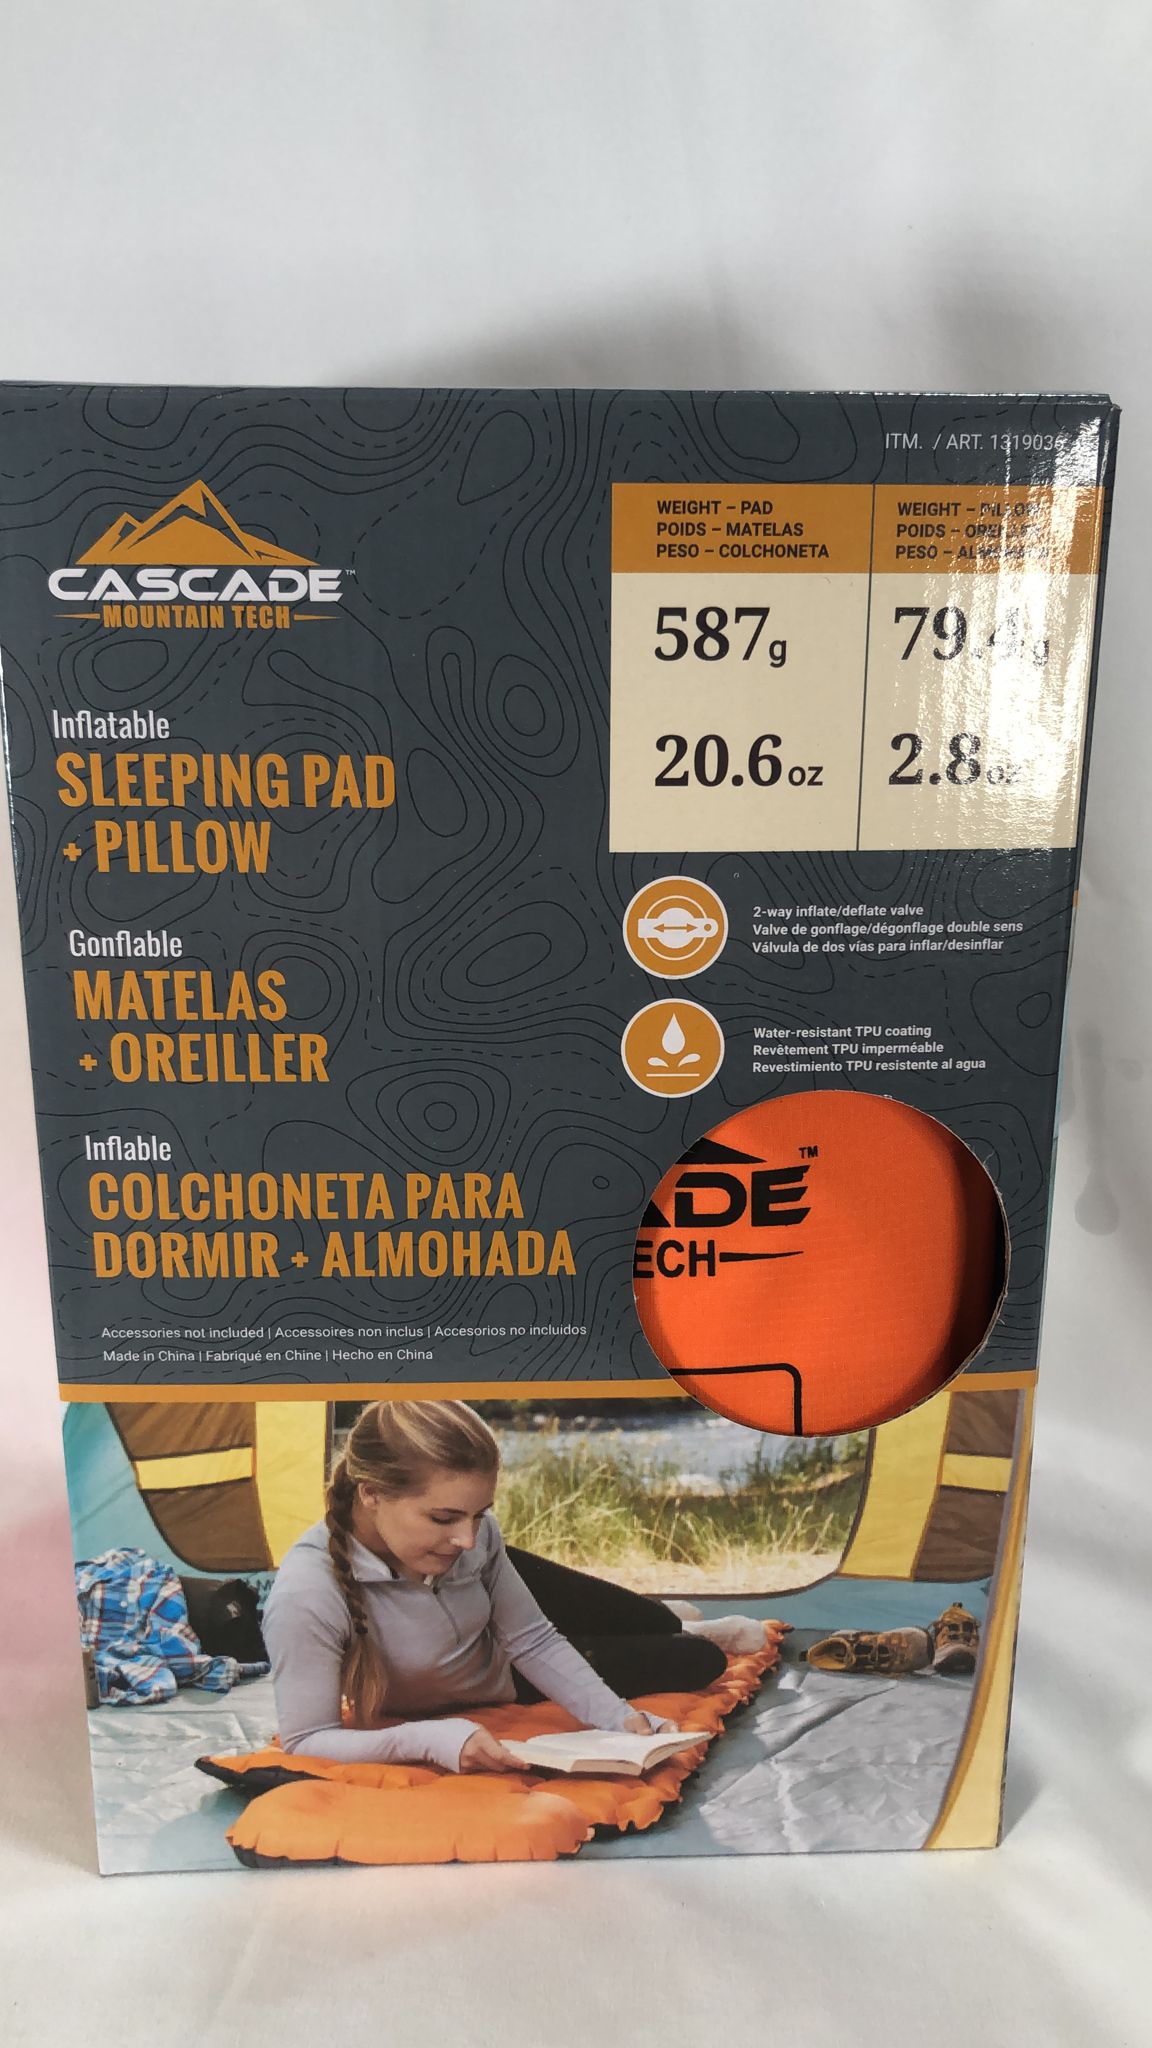 Cascade Inflatable Sleeping Pad and Pillow - Lightweight, Packable, and Durable